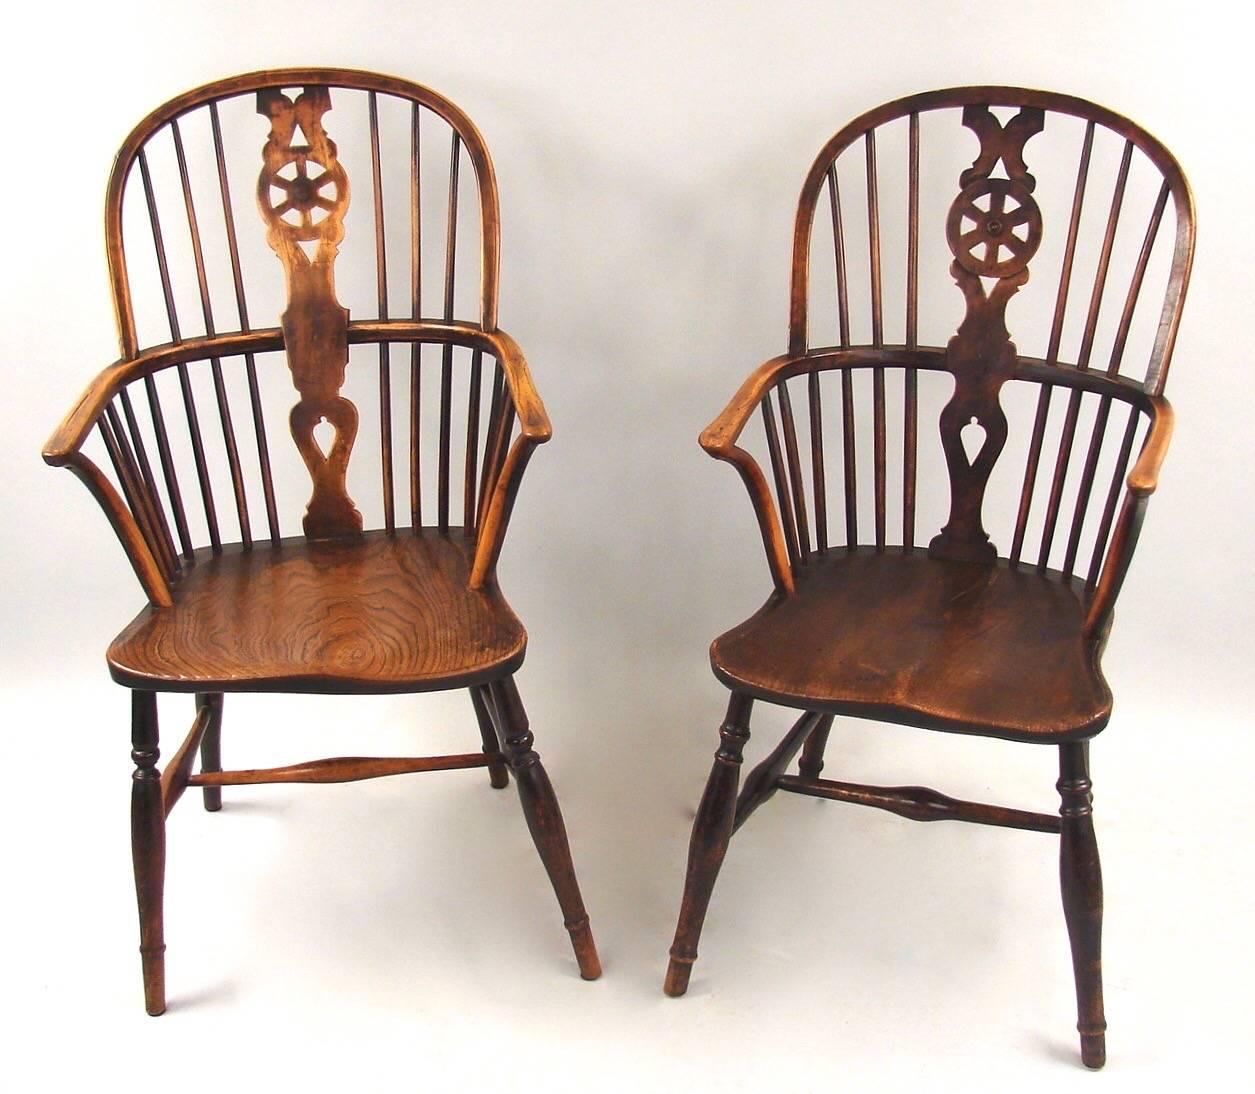 Matched Pair of English Wheelback Windsor Armchairs 1